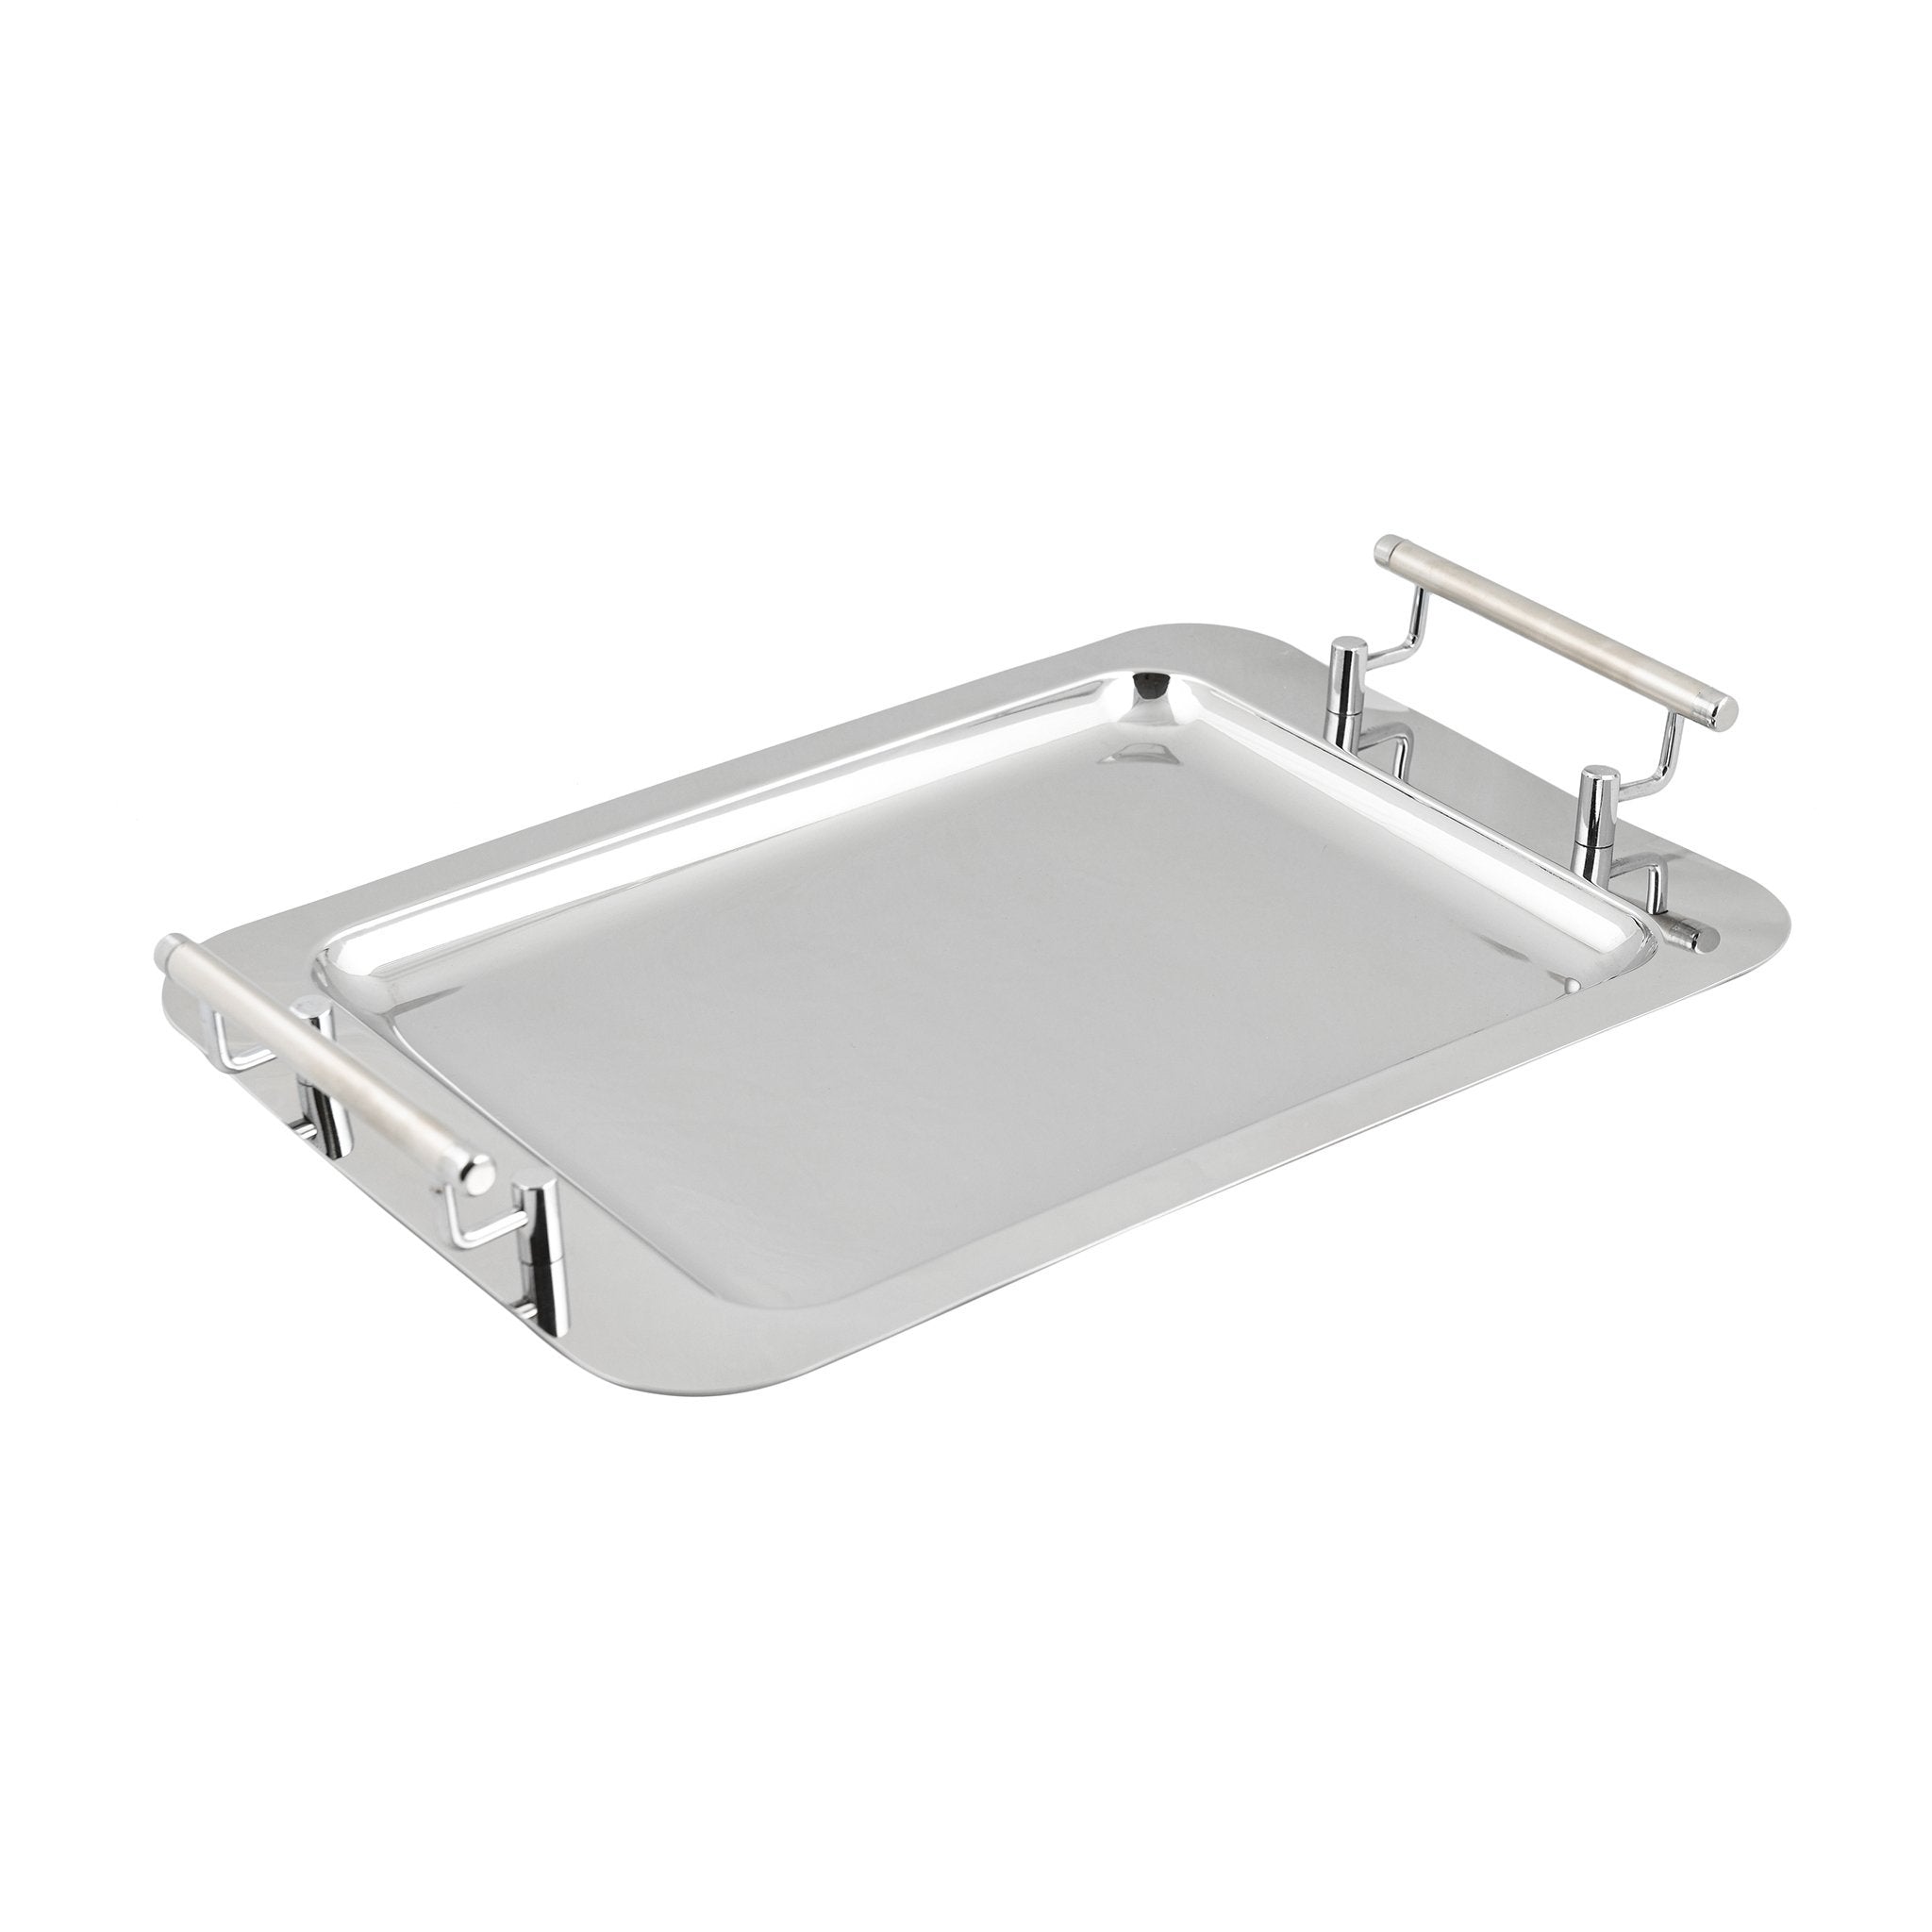 Rectangular Tray with Handles - Stainless Steel 18/10 - 48x31cm - 8000110